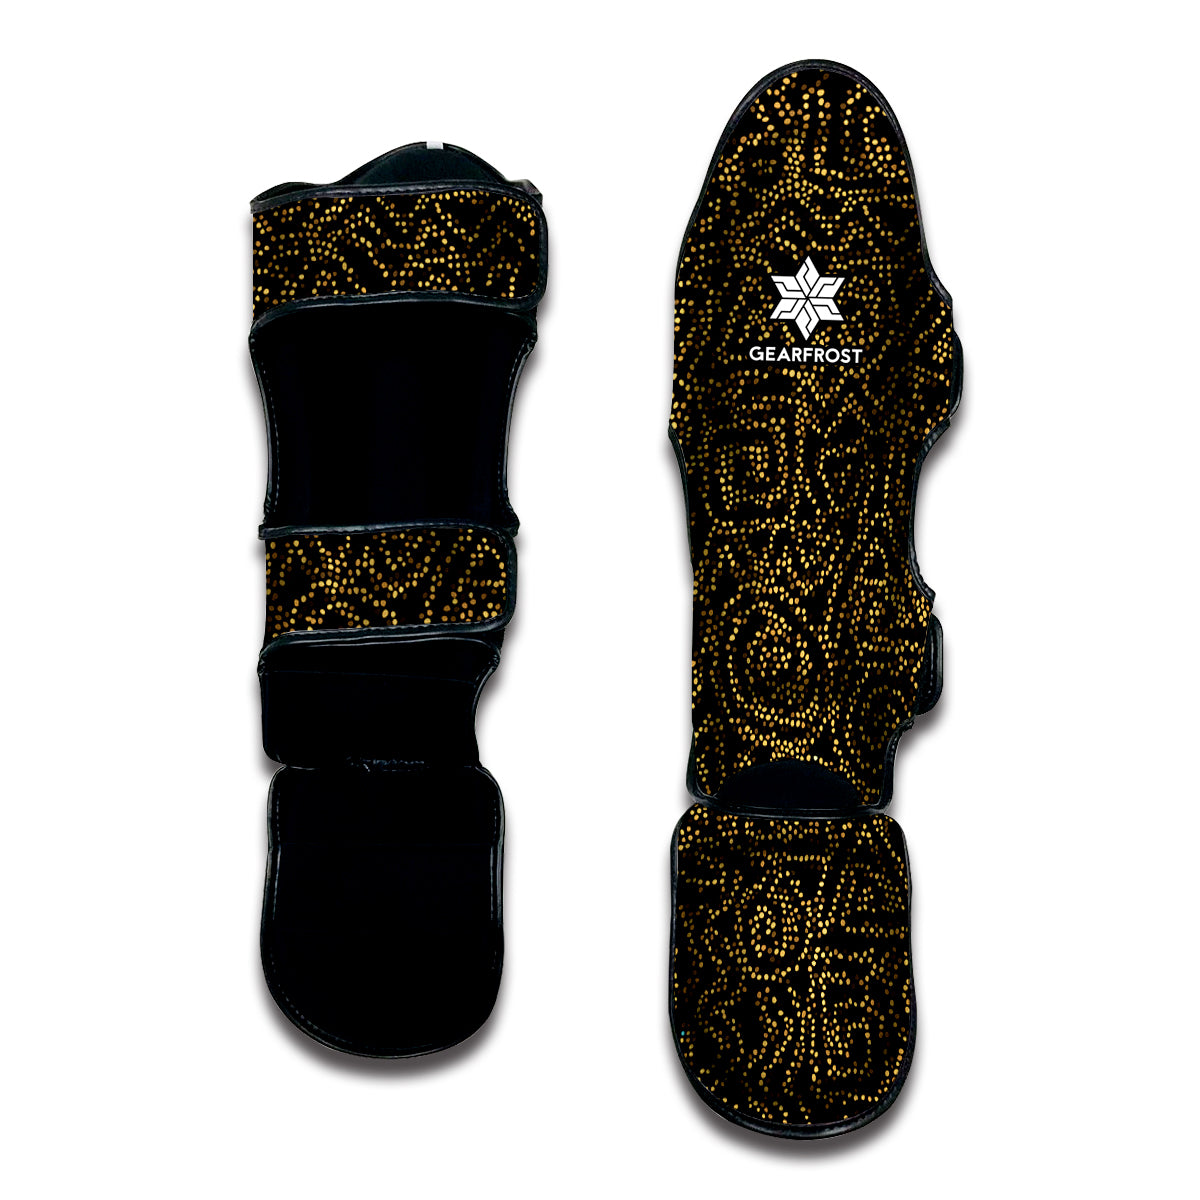 Black And Gold African Afro Print Muay Thai Shin Guard